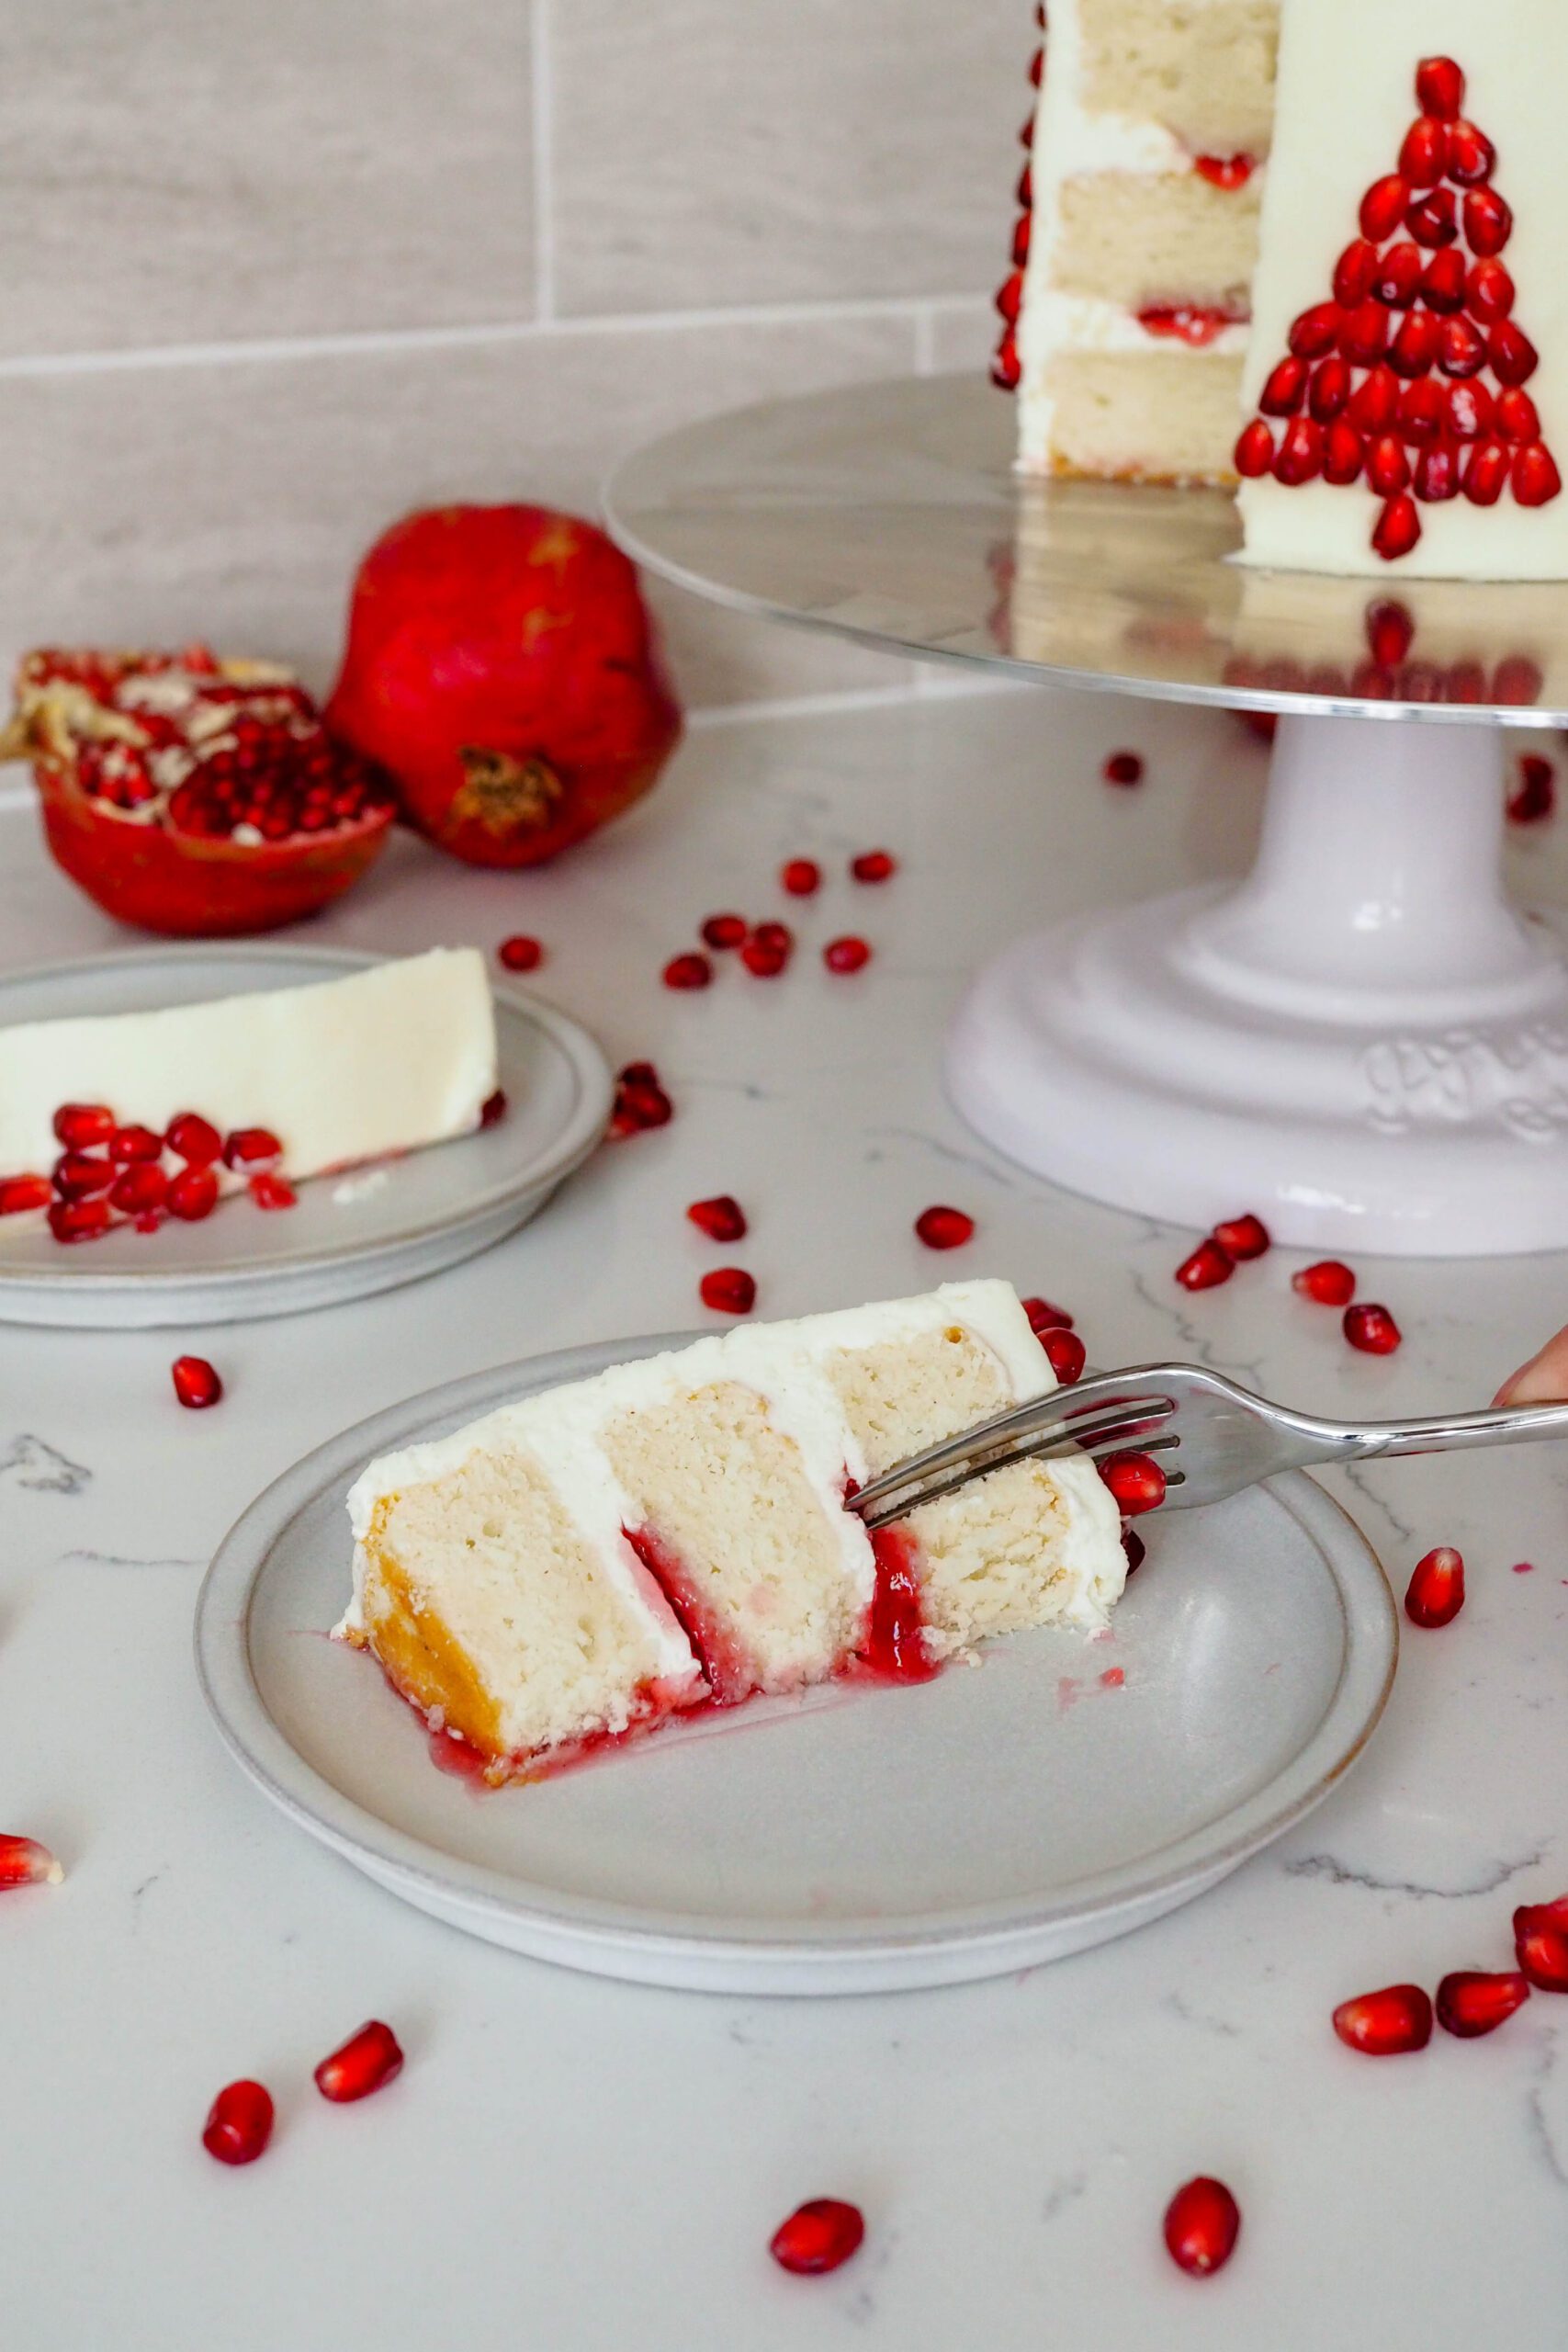 A fork cuts into a slice of white cake with white chocolate buttercream and pomegranate filling.